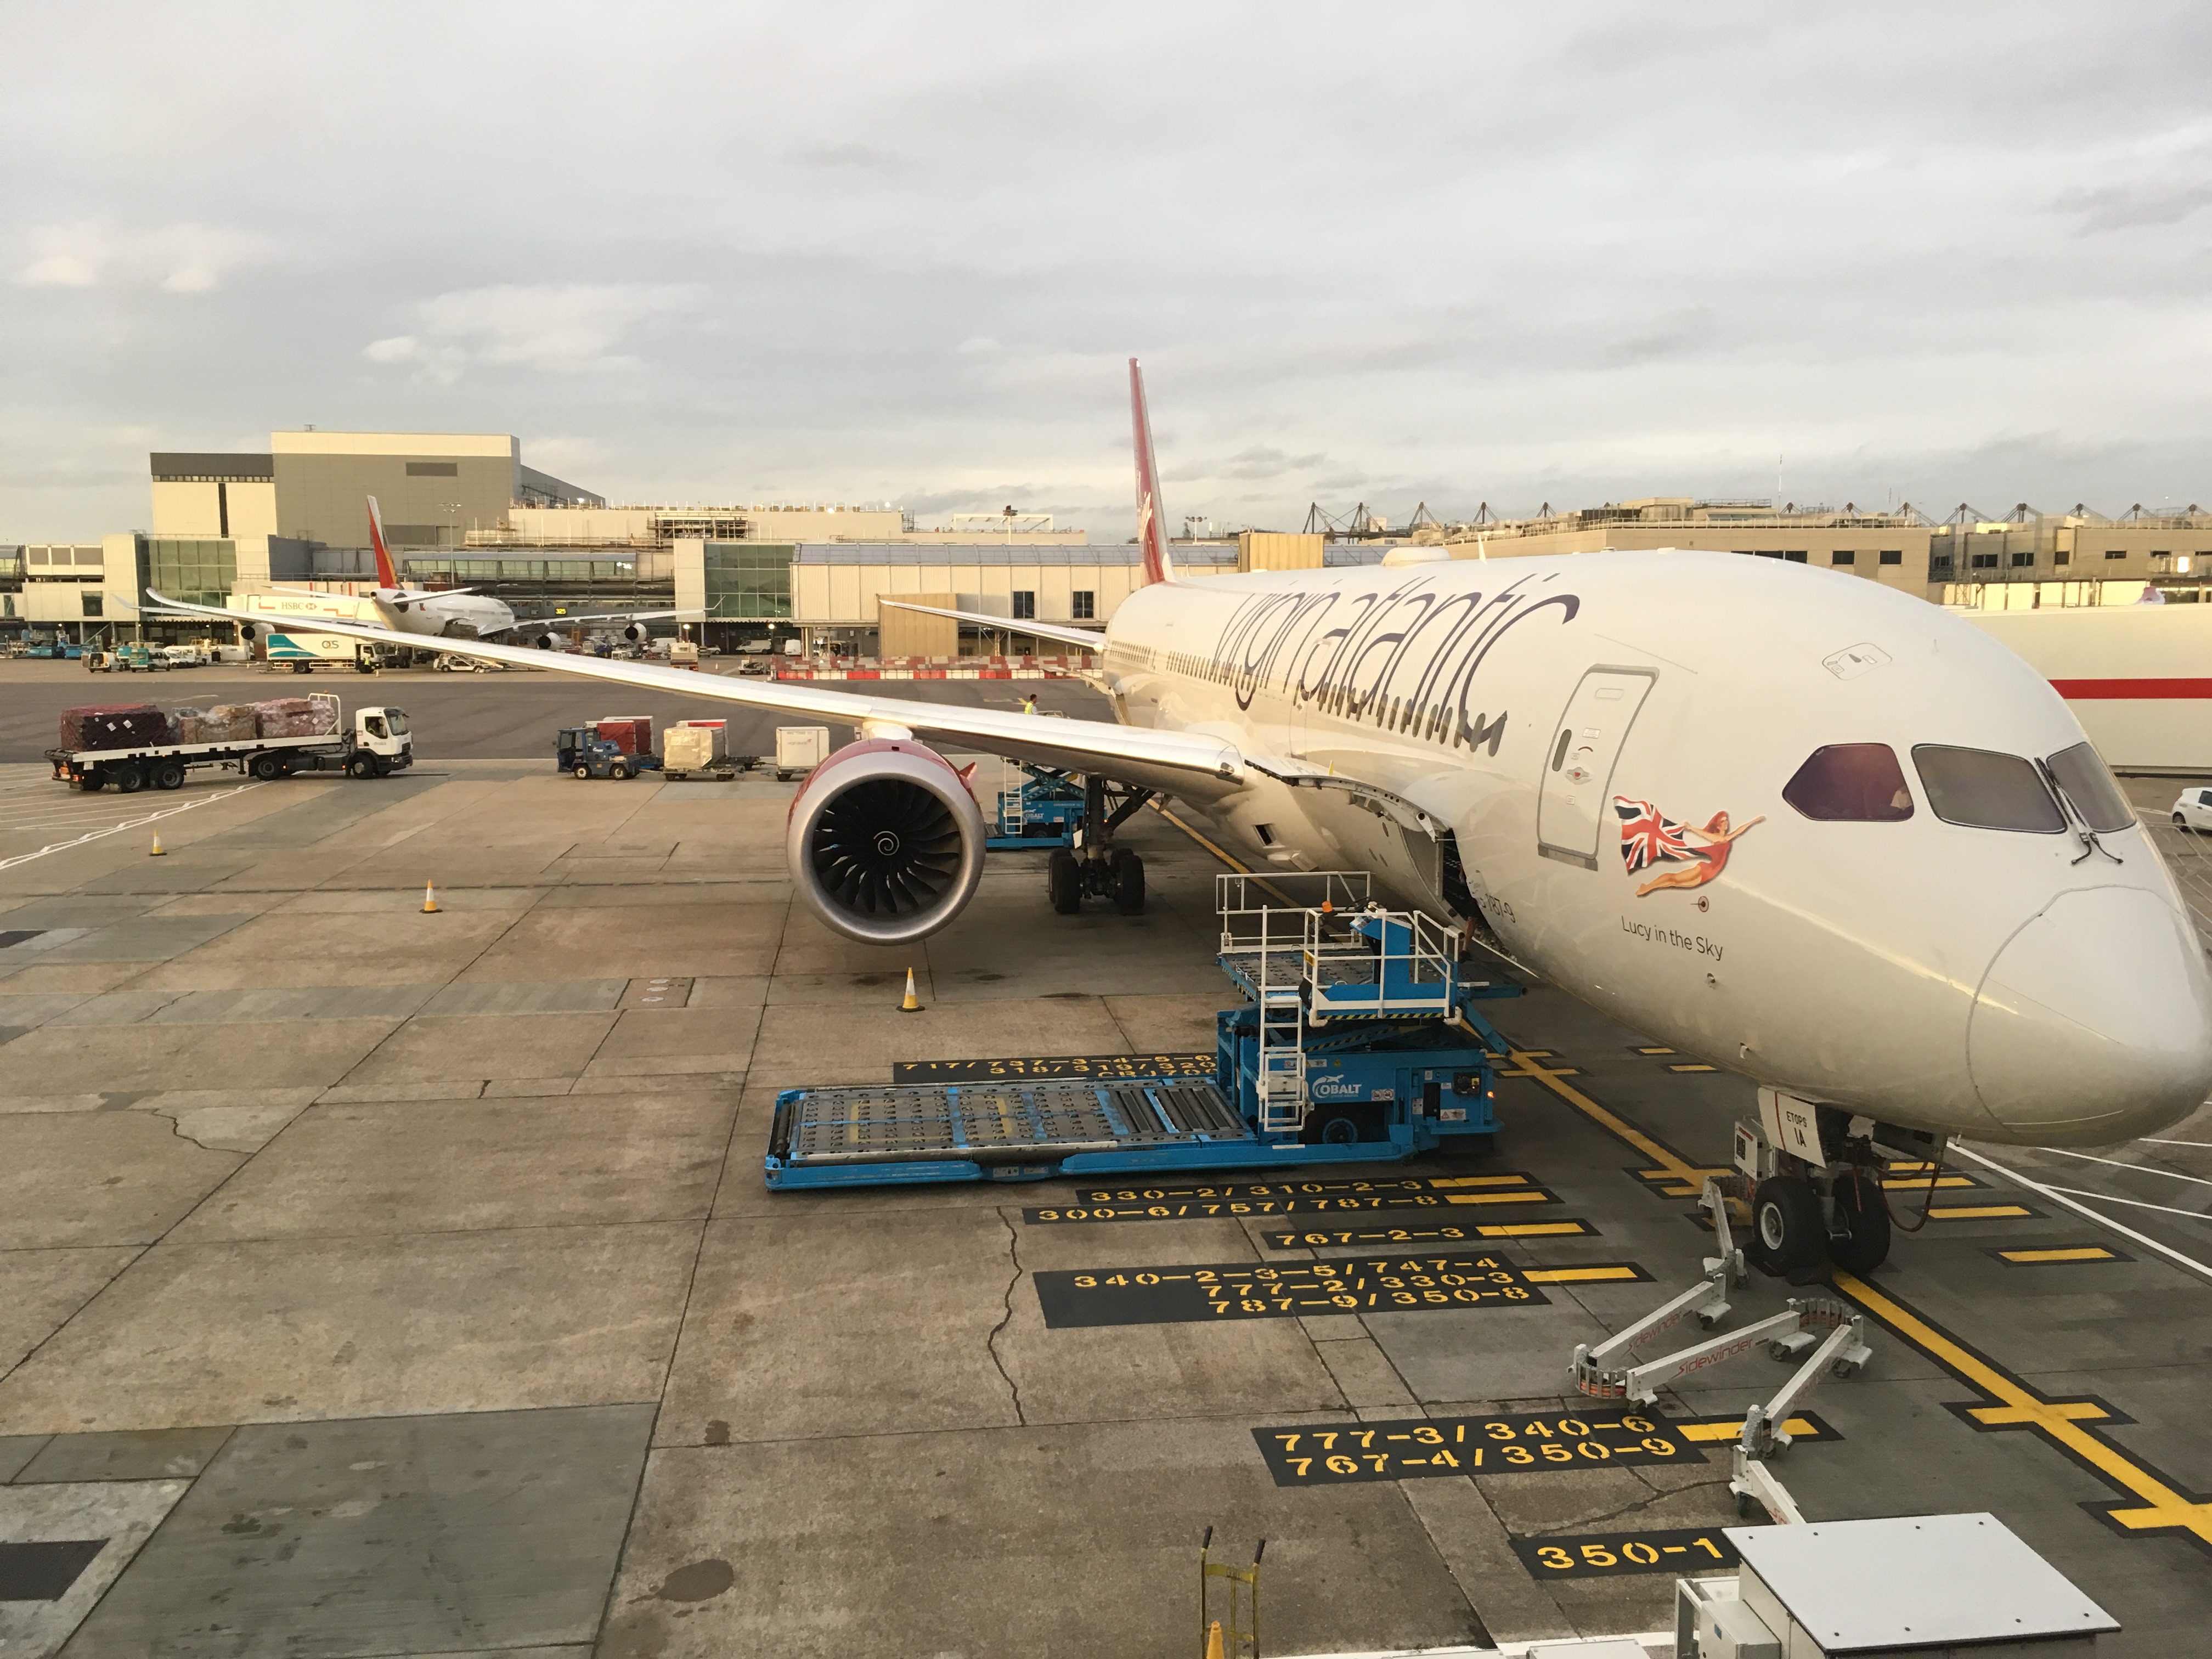 Virgin Atlantic Boeing 787-900 'Lucy in the Sky' plane on a stand at London Heathrow Airport